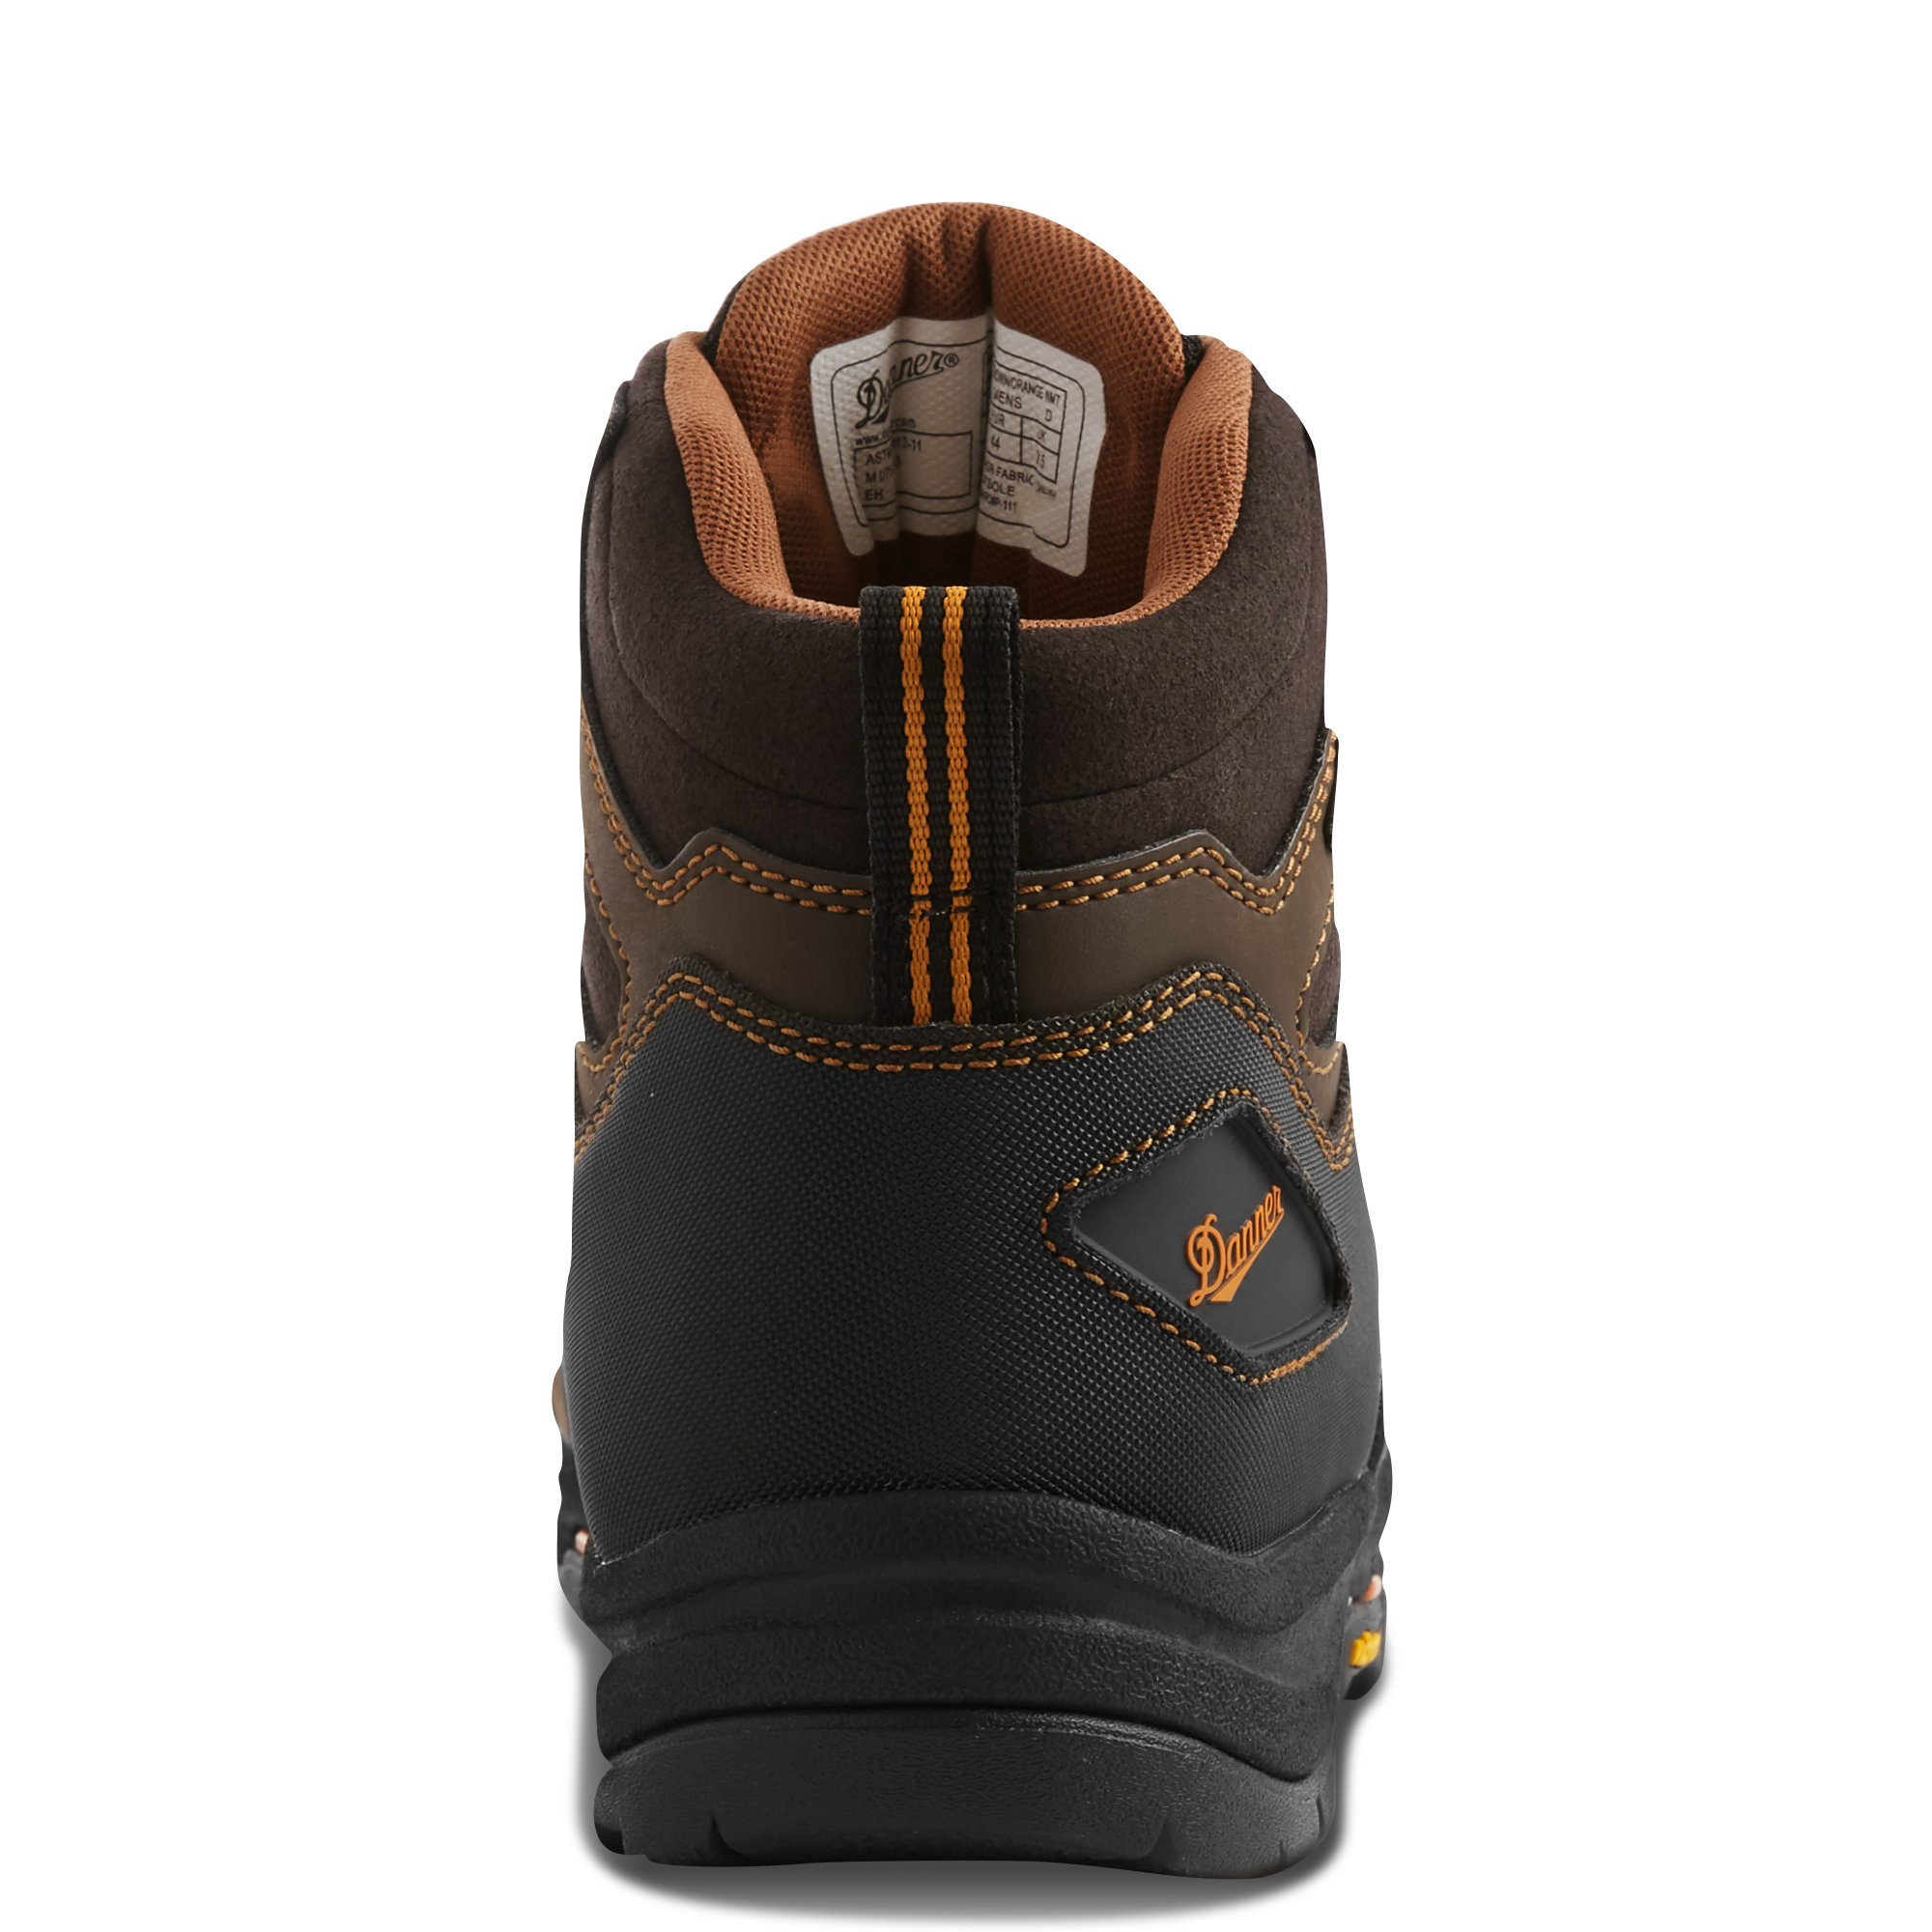 LaCrosse Men's Vicious 4-1/2 Inch Work Boots with Composite Toe (Brown/Orange) from Columbia Safety